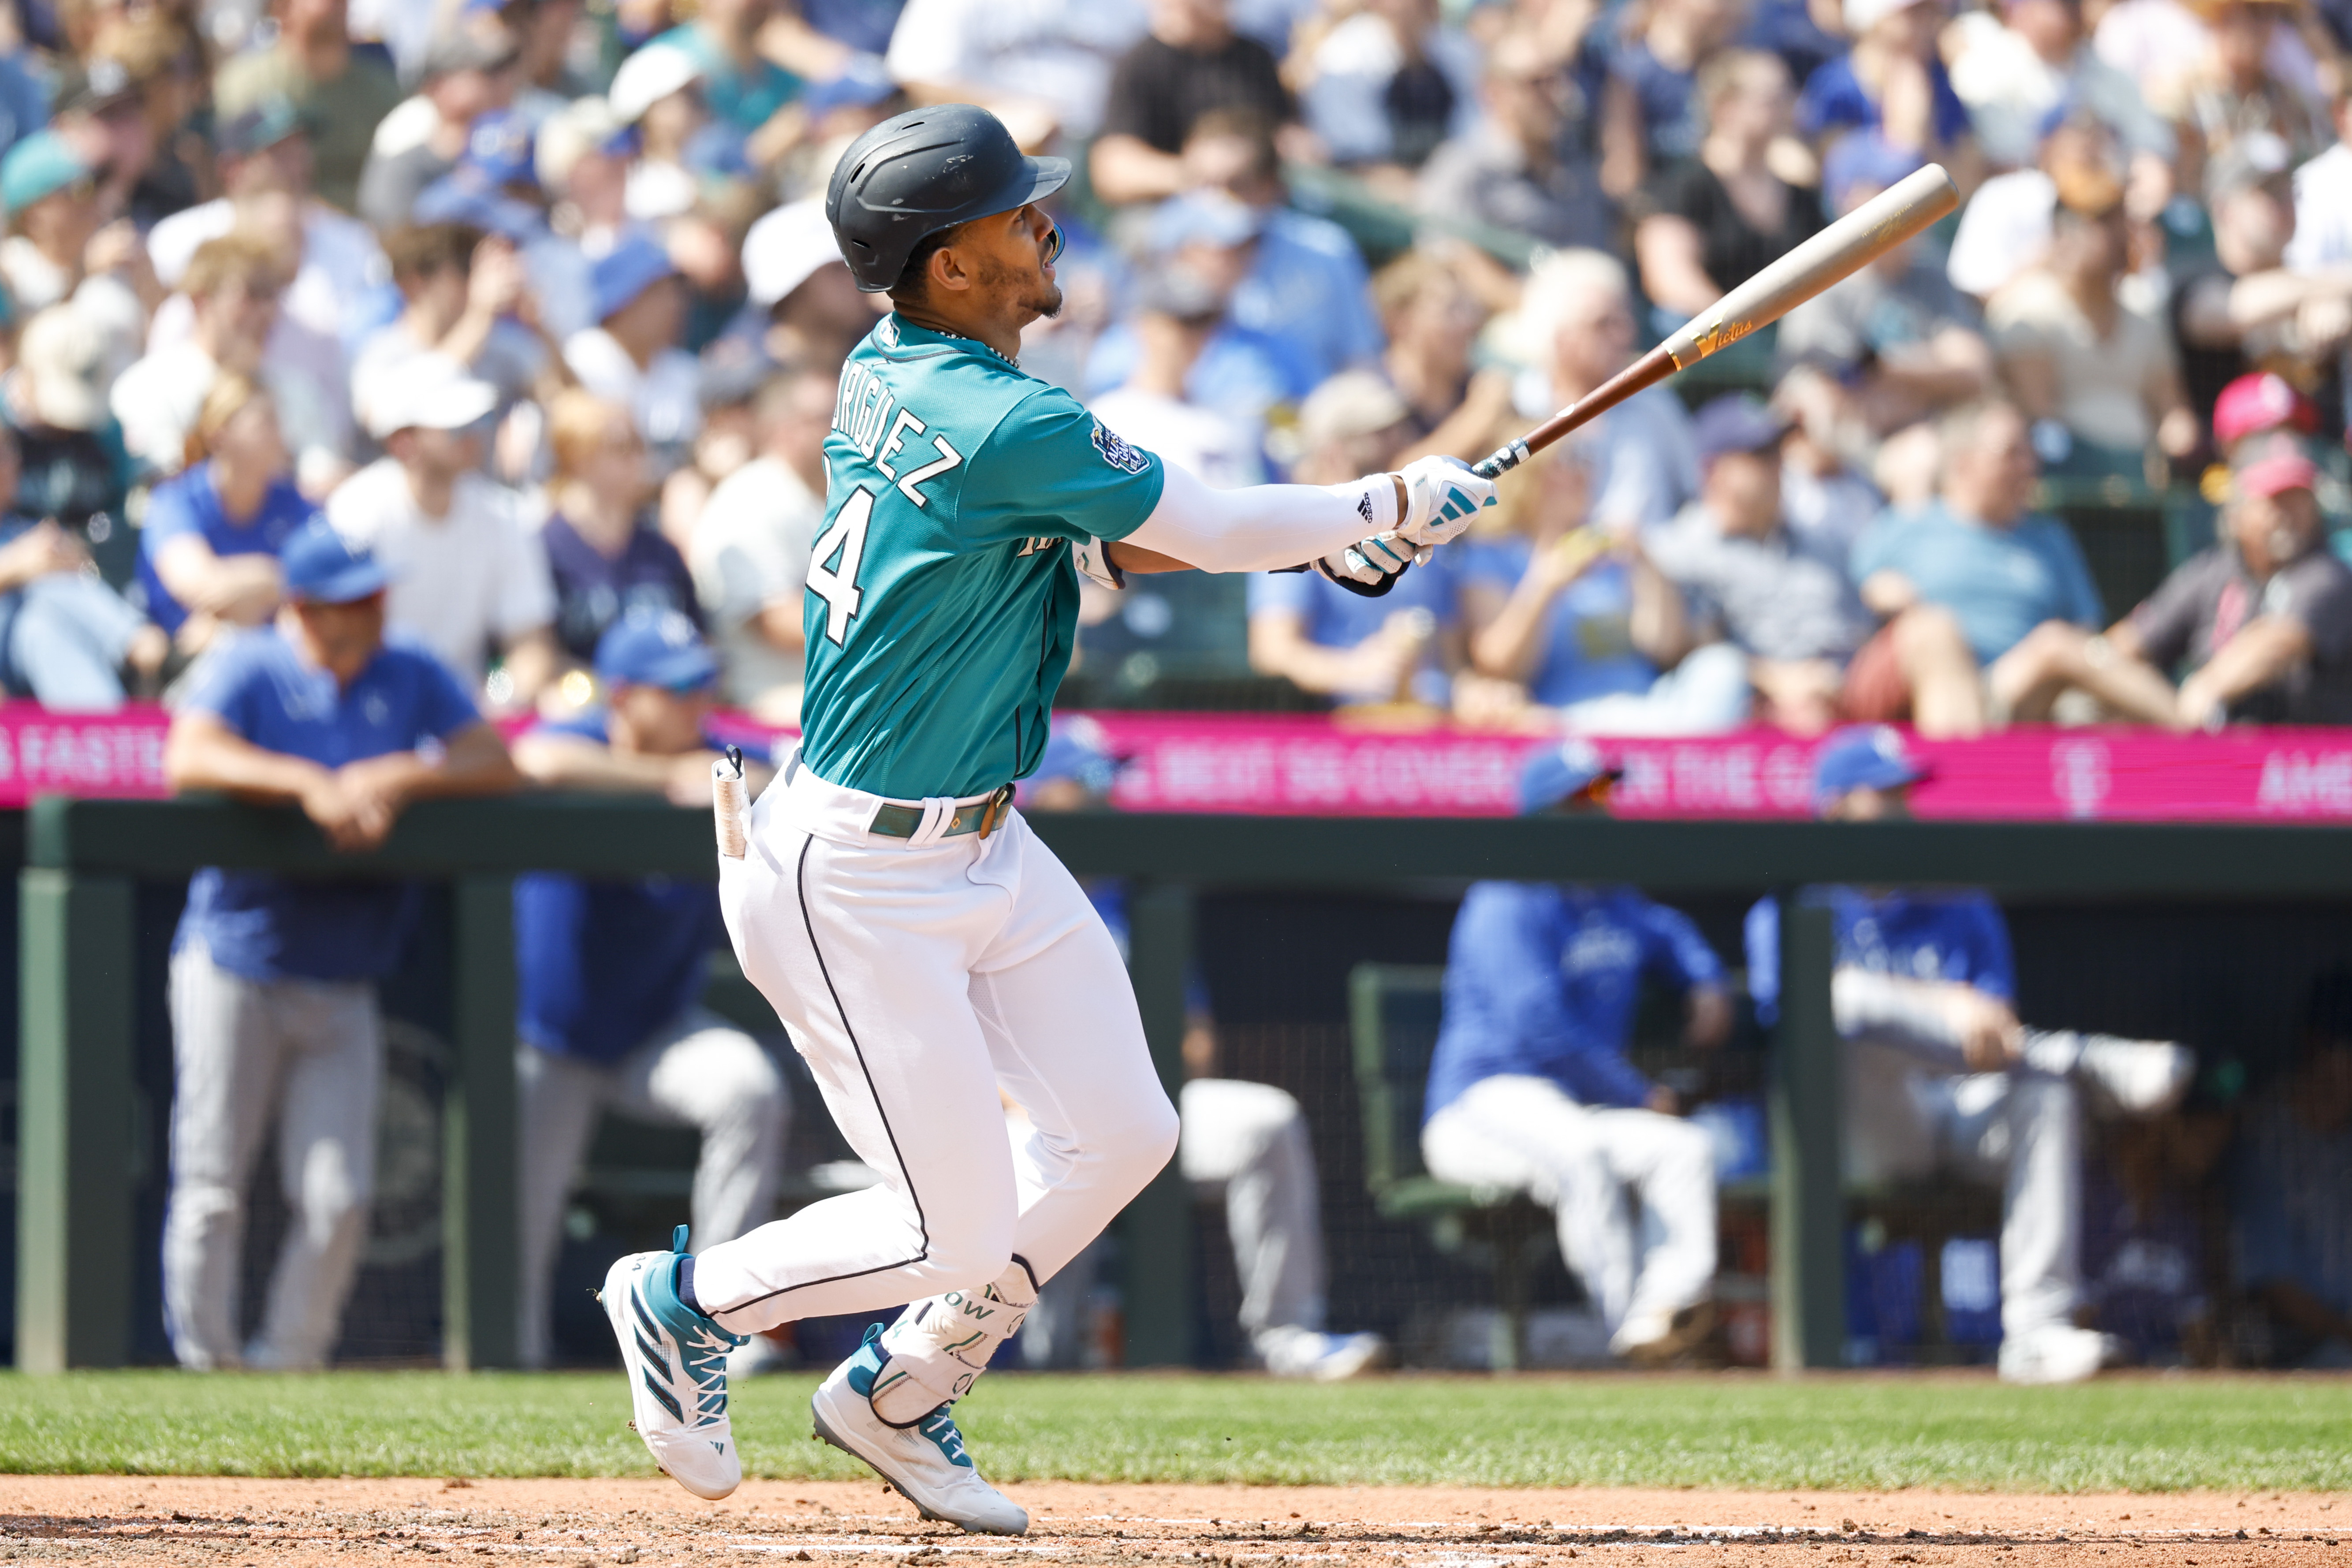 Teoscar Hernández homers twice to lead Mariners over Royals 15-2 - Newsday